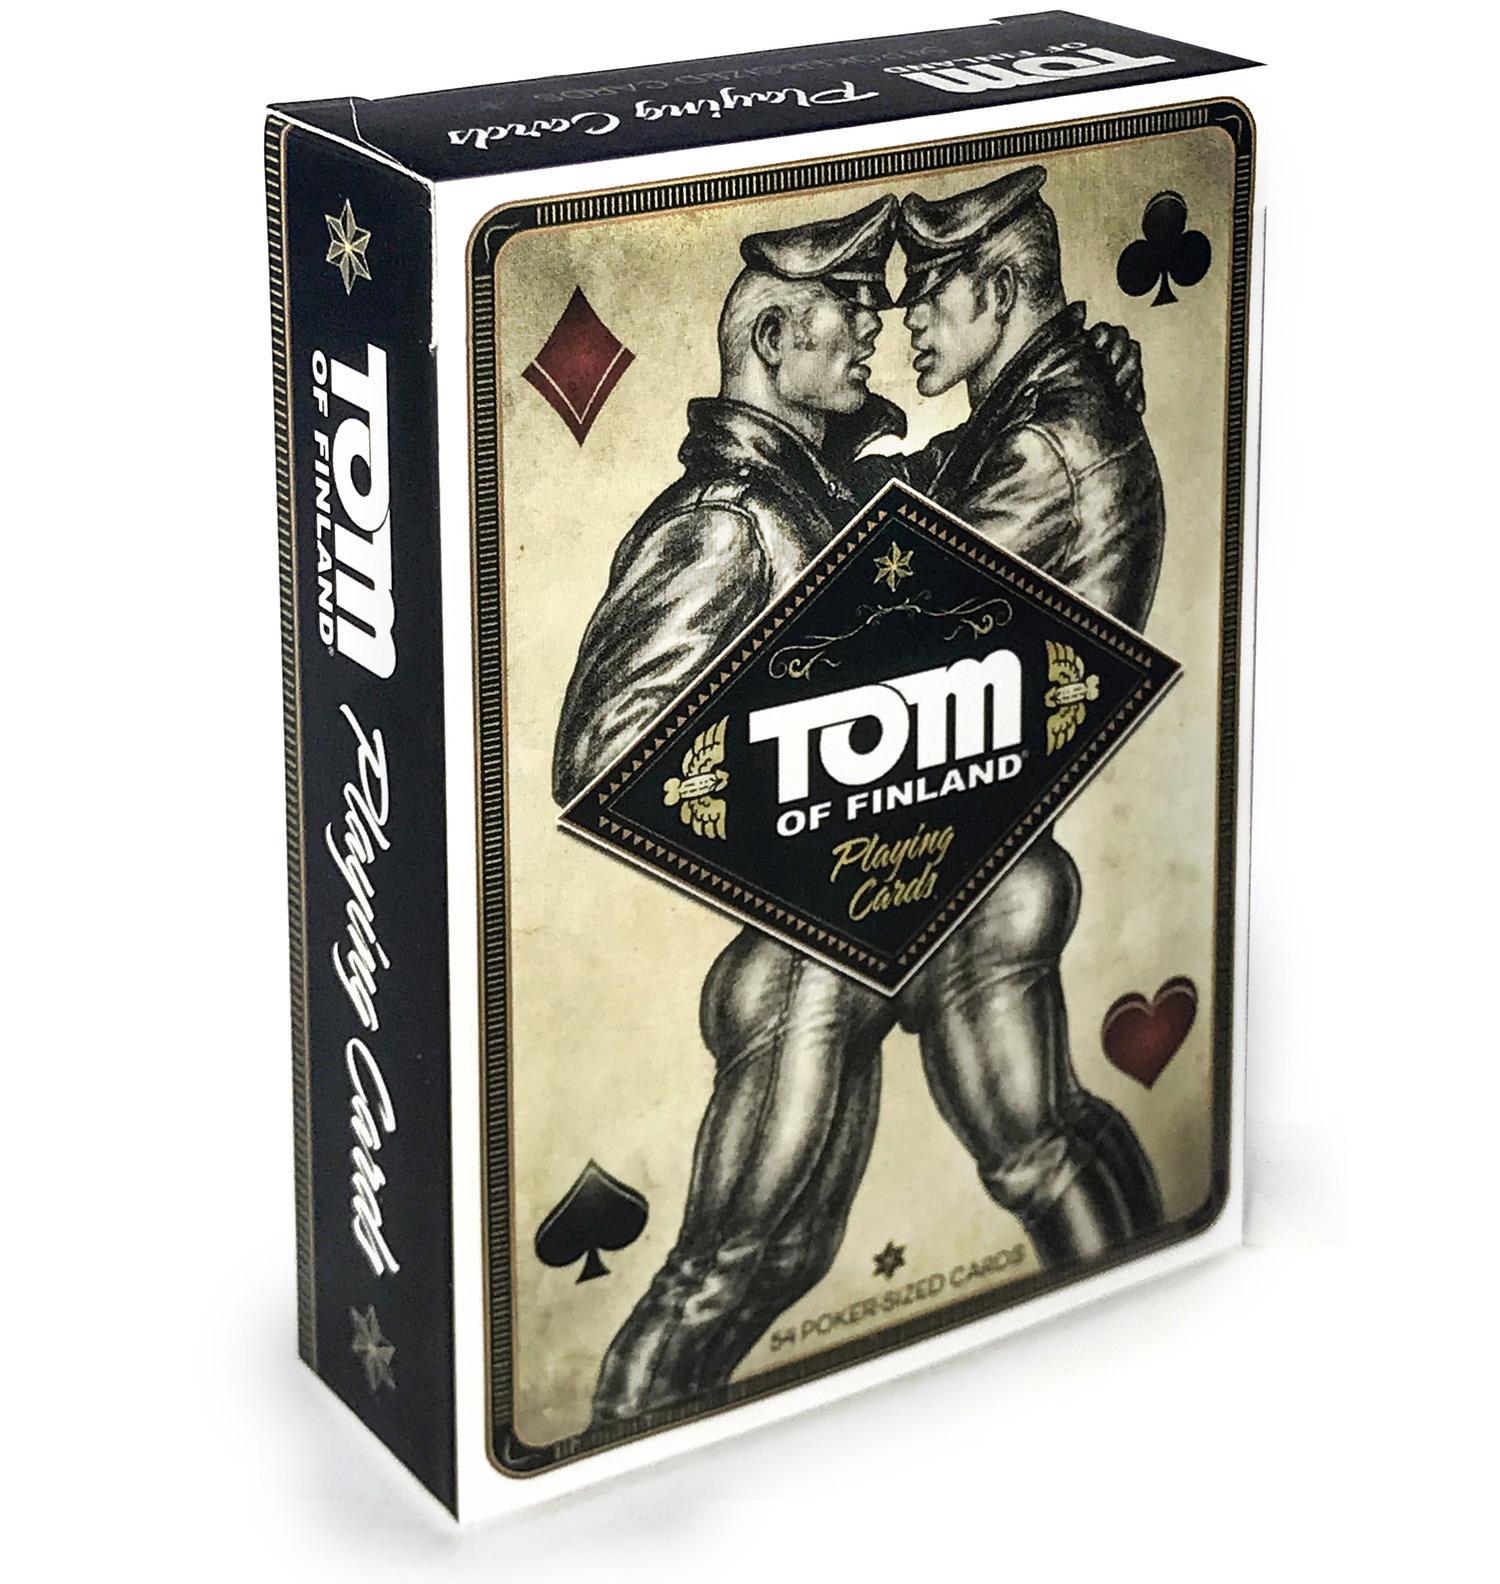 Tom of finland playing cards box.jpg